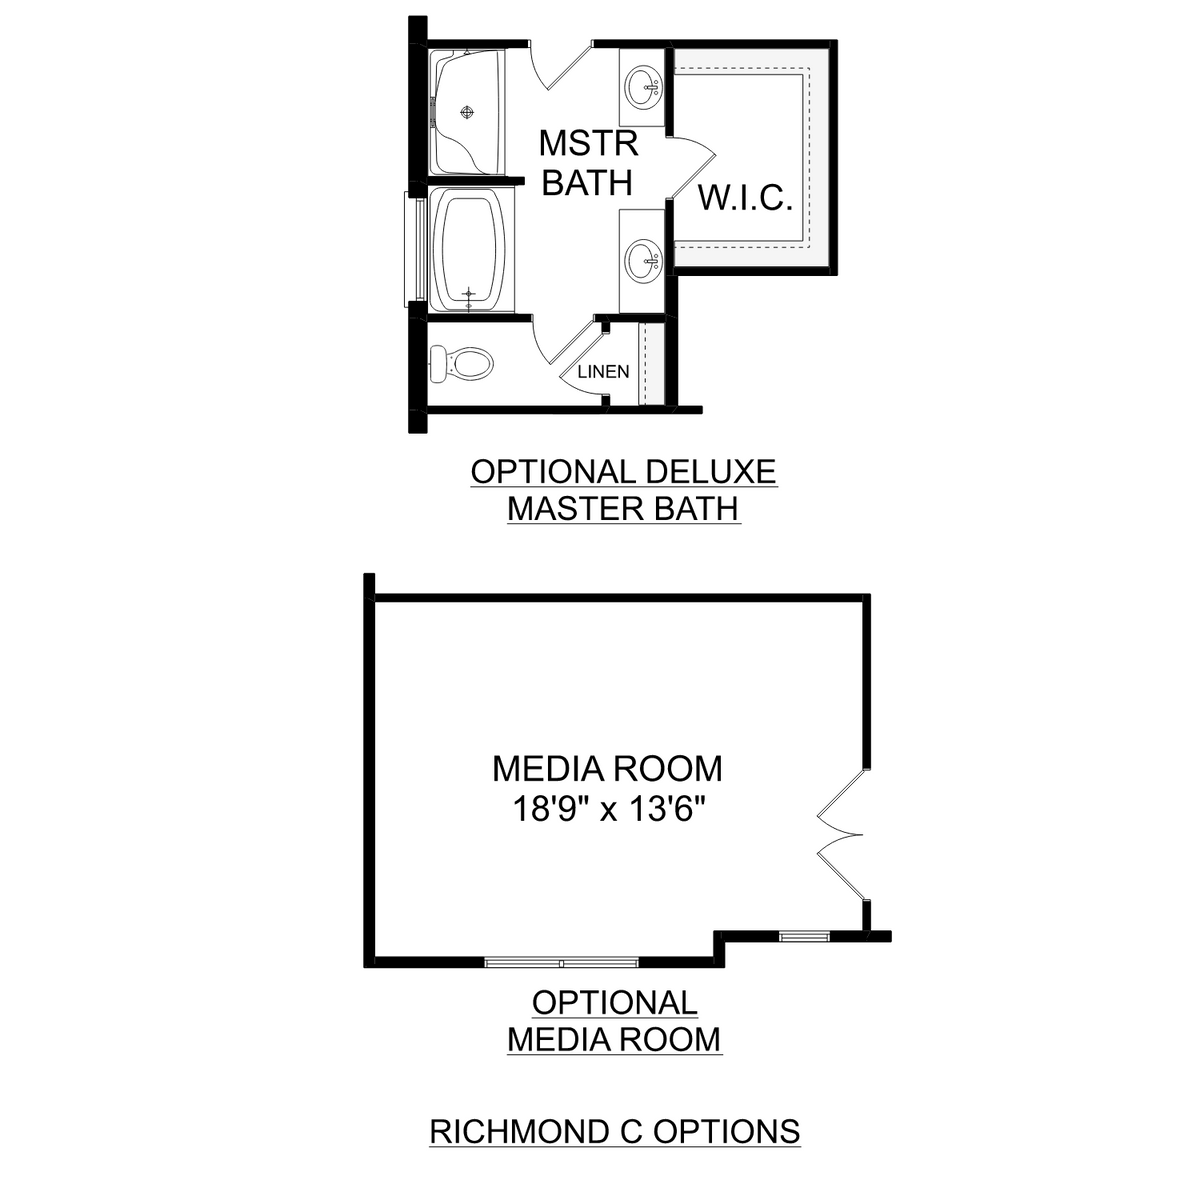 3 - The Richmond C floor plan layout for 4023 Rockland Circle SE in Davidson Homes' Monteagle Cove community.